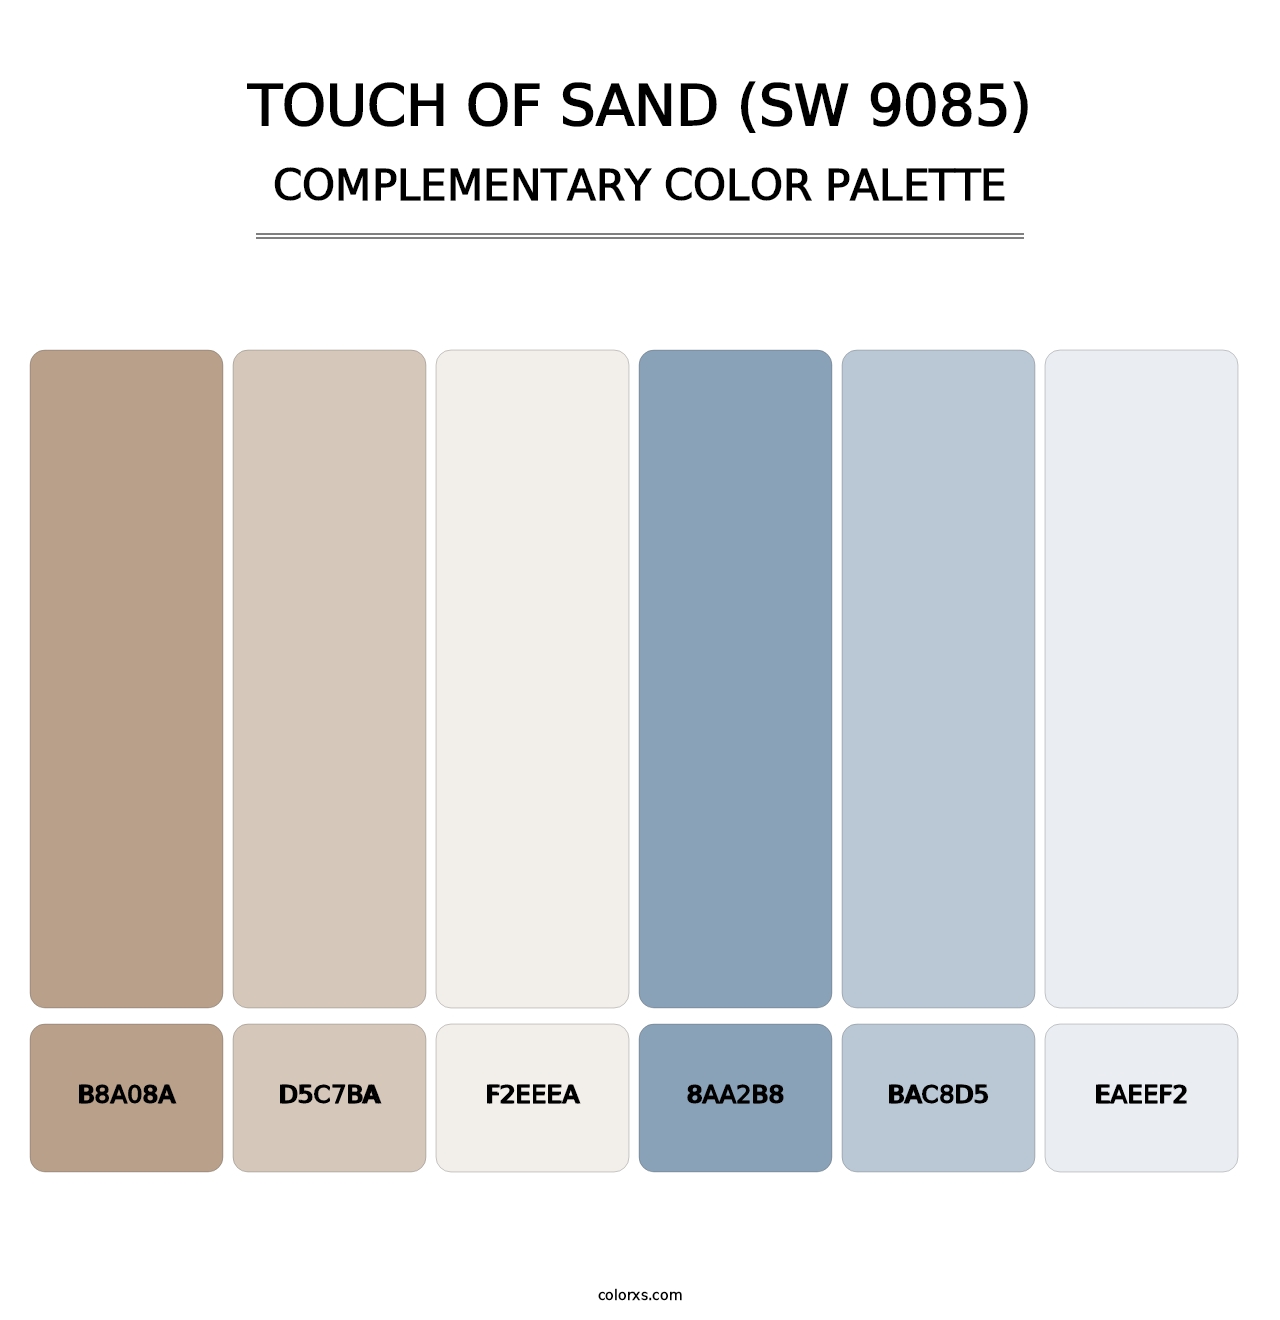 Touch of Sand (SW 9085) - Complementary Color Palette